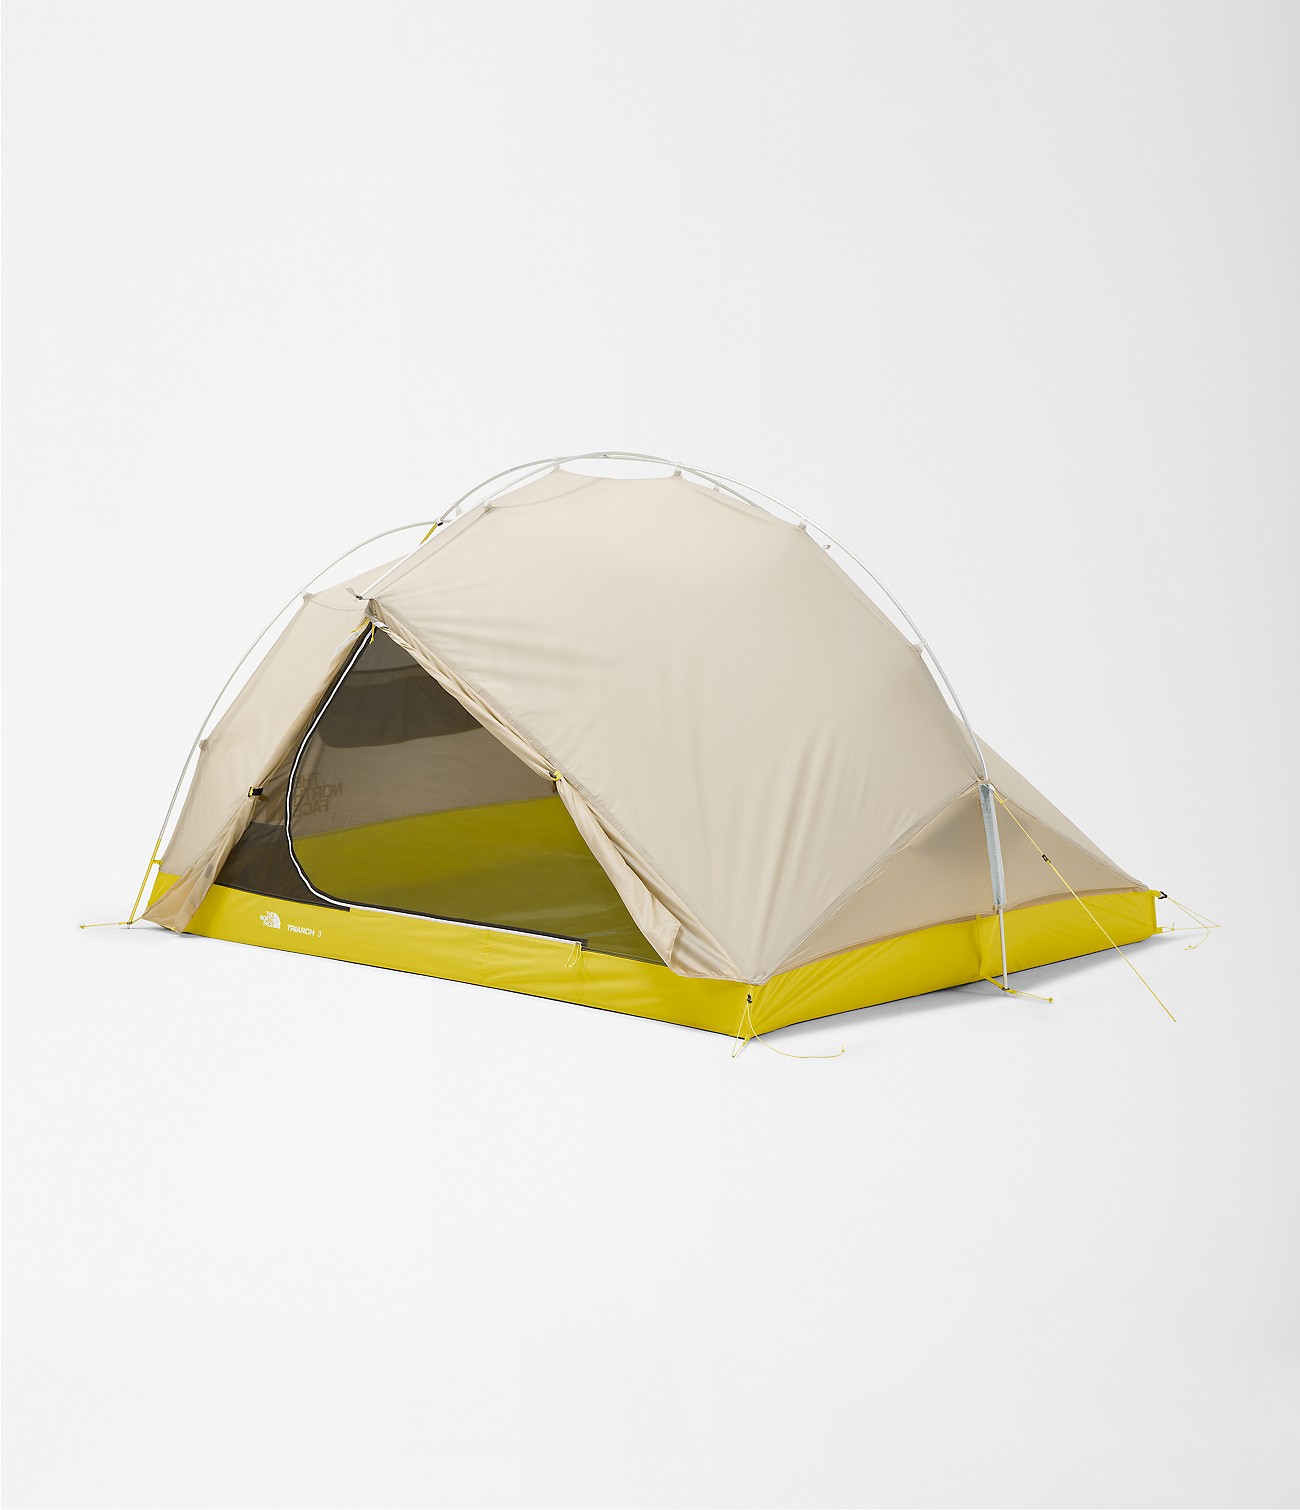 Triarch 2.0 3 Tent | The North Face